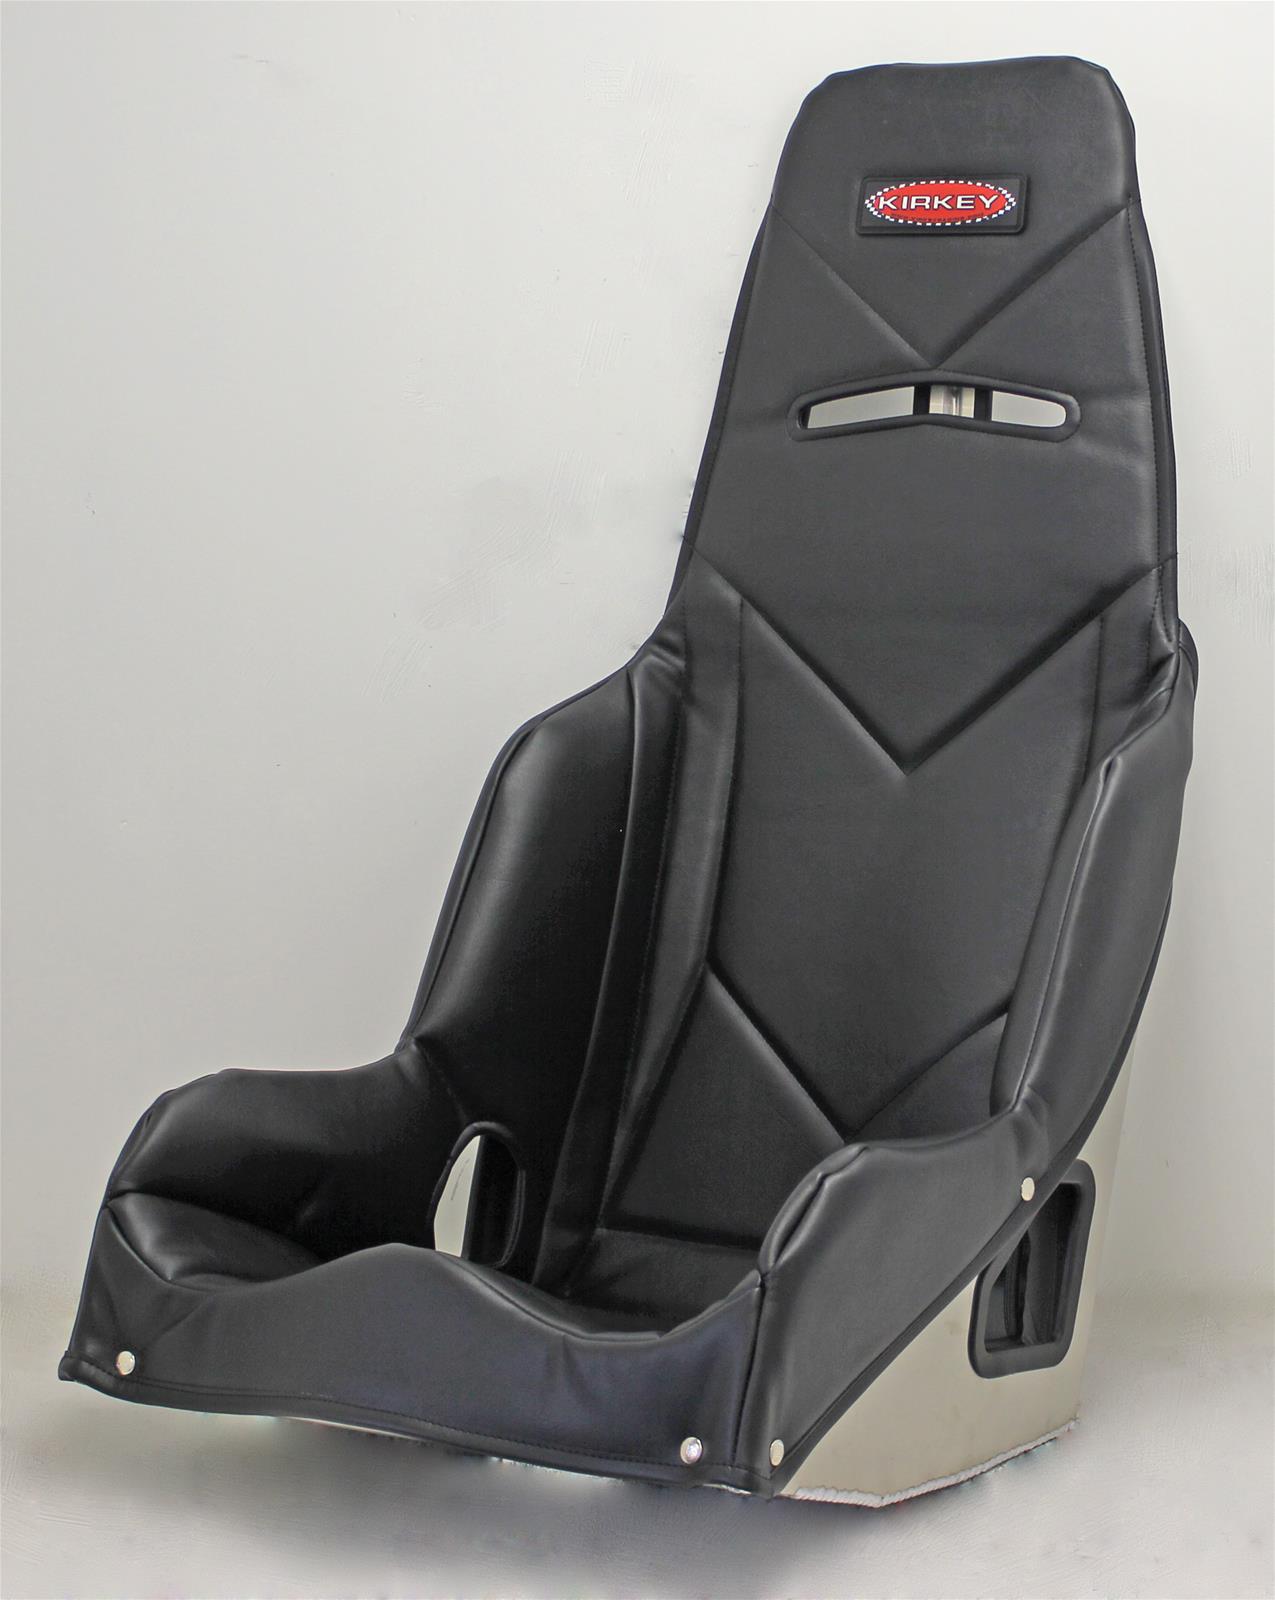 Vinyl Black Each 38 Series 16 in Wide Seat Snap Attachment Kirkey Seat Cover 3816001 